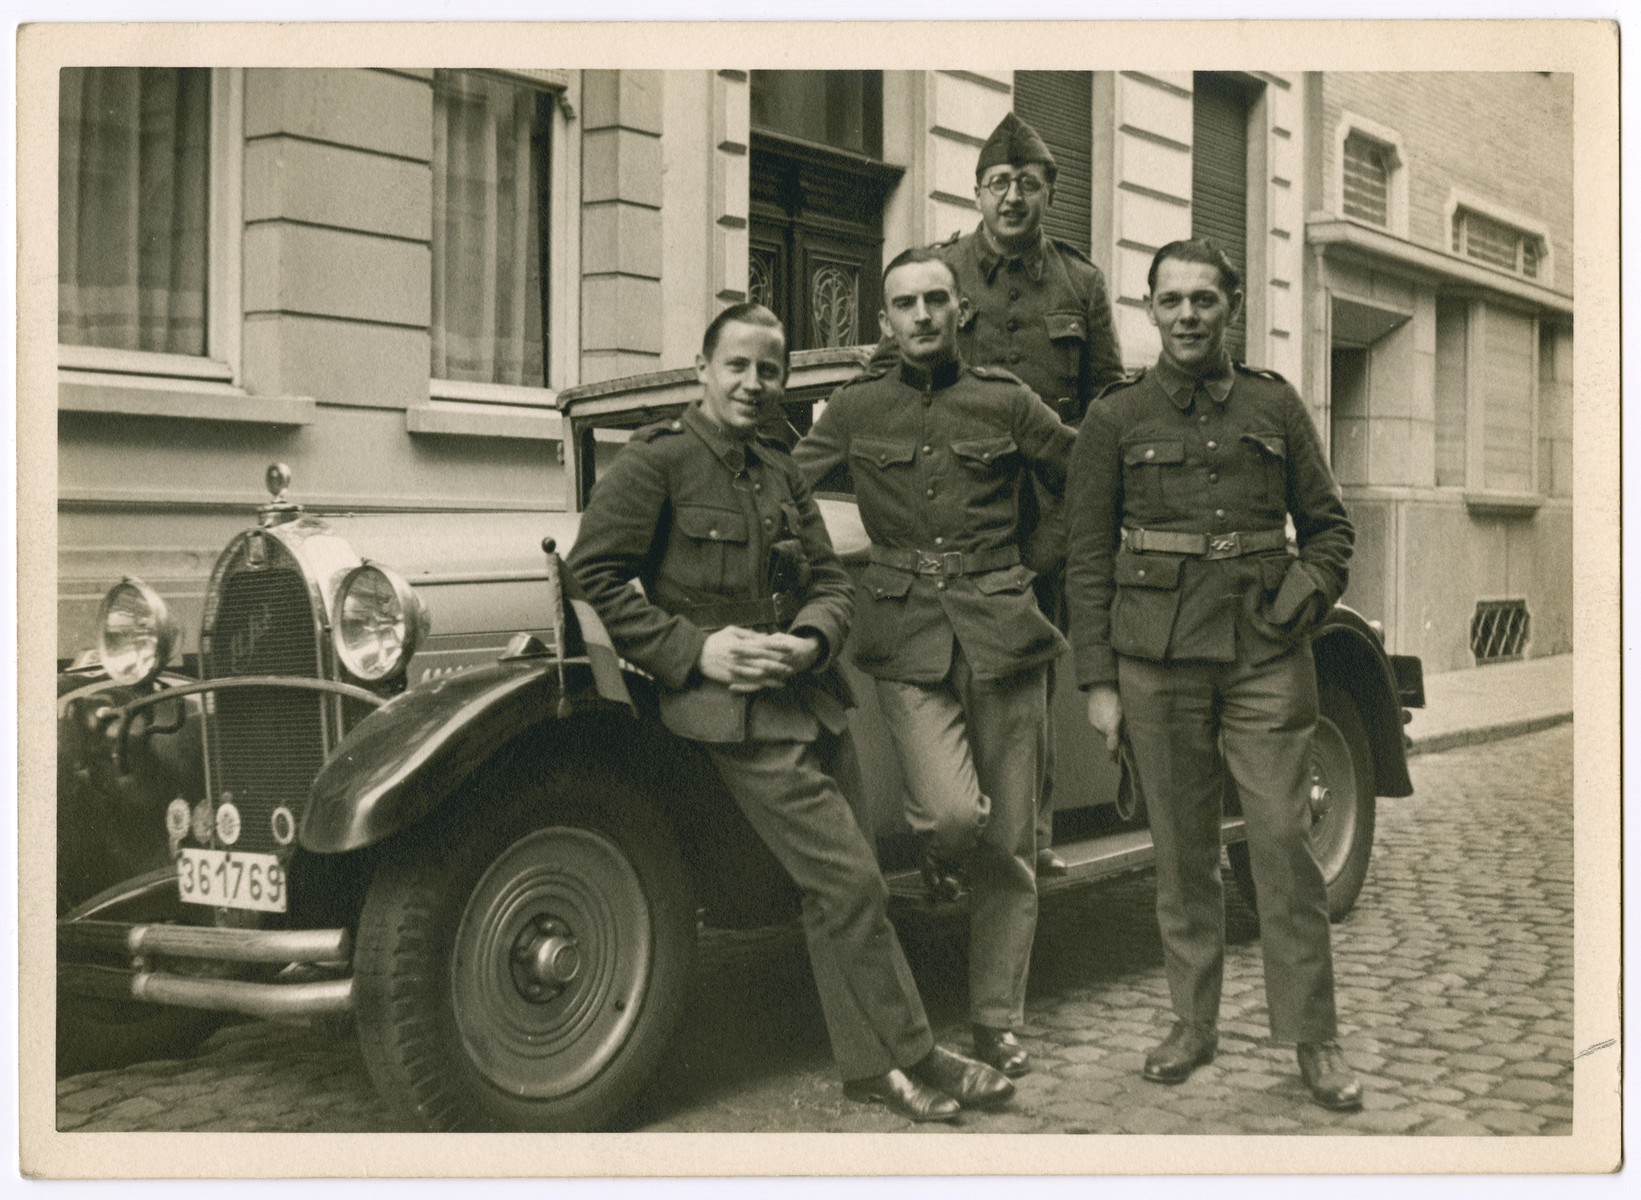 Four Belgian soldiers pose by an automobile.

Leopold Guttman is pictured in the top, center.